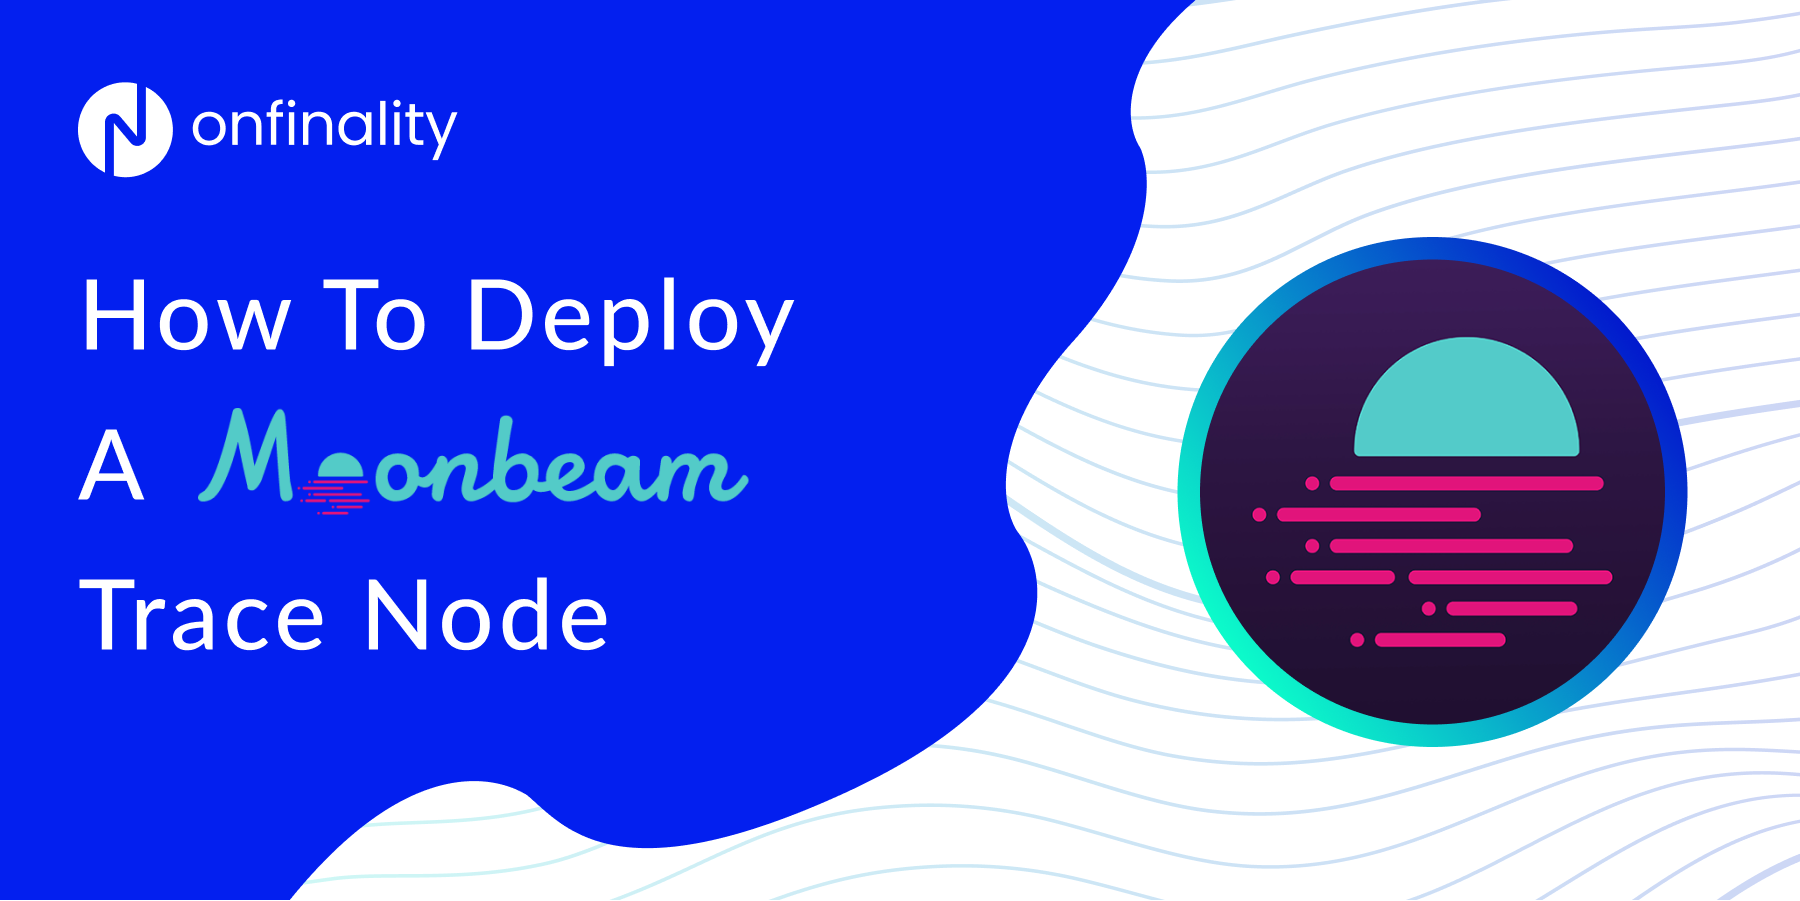 How to Deploy a Trace Node for Moonbeam on OnFinality